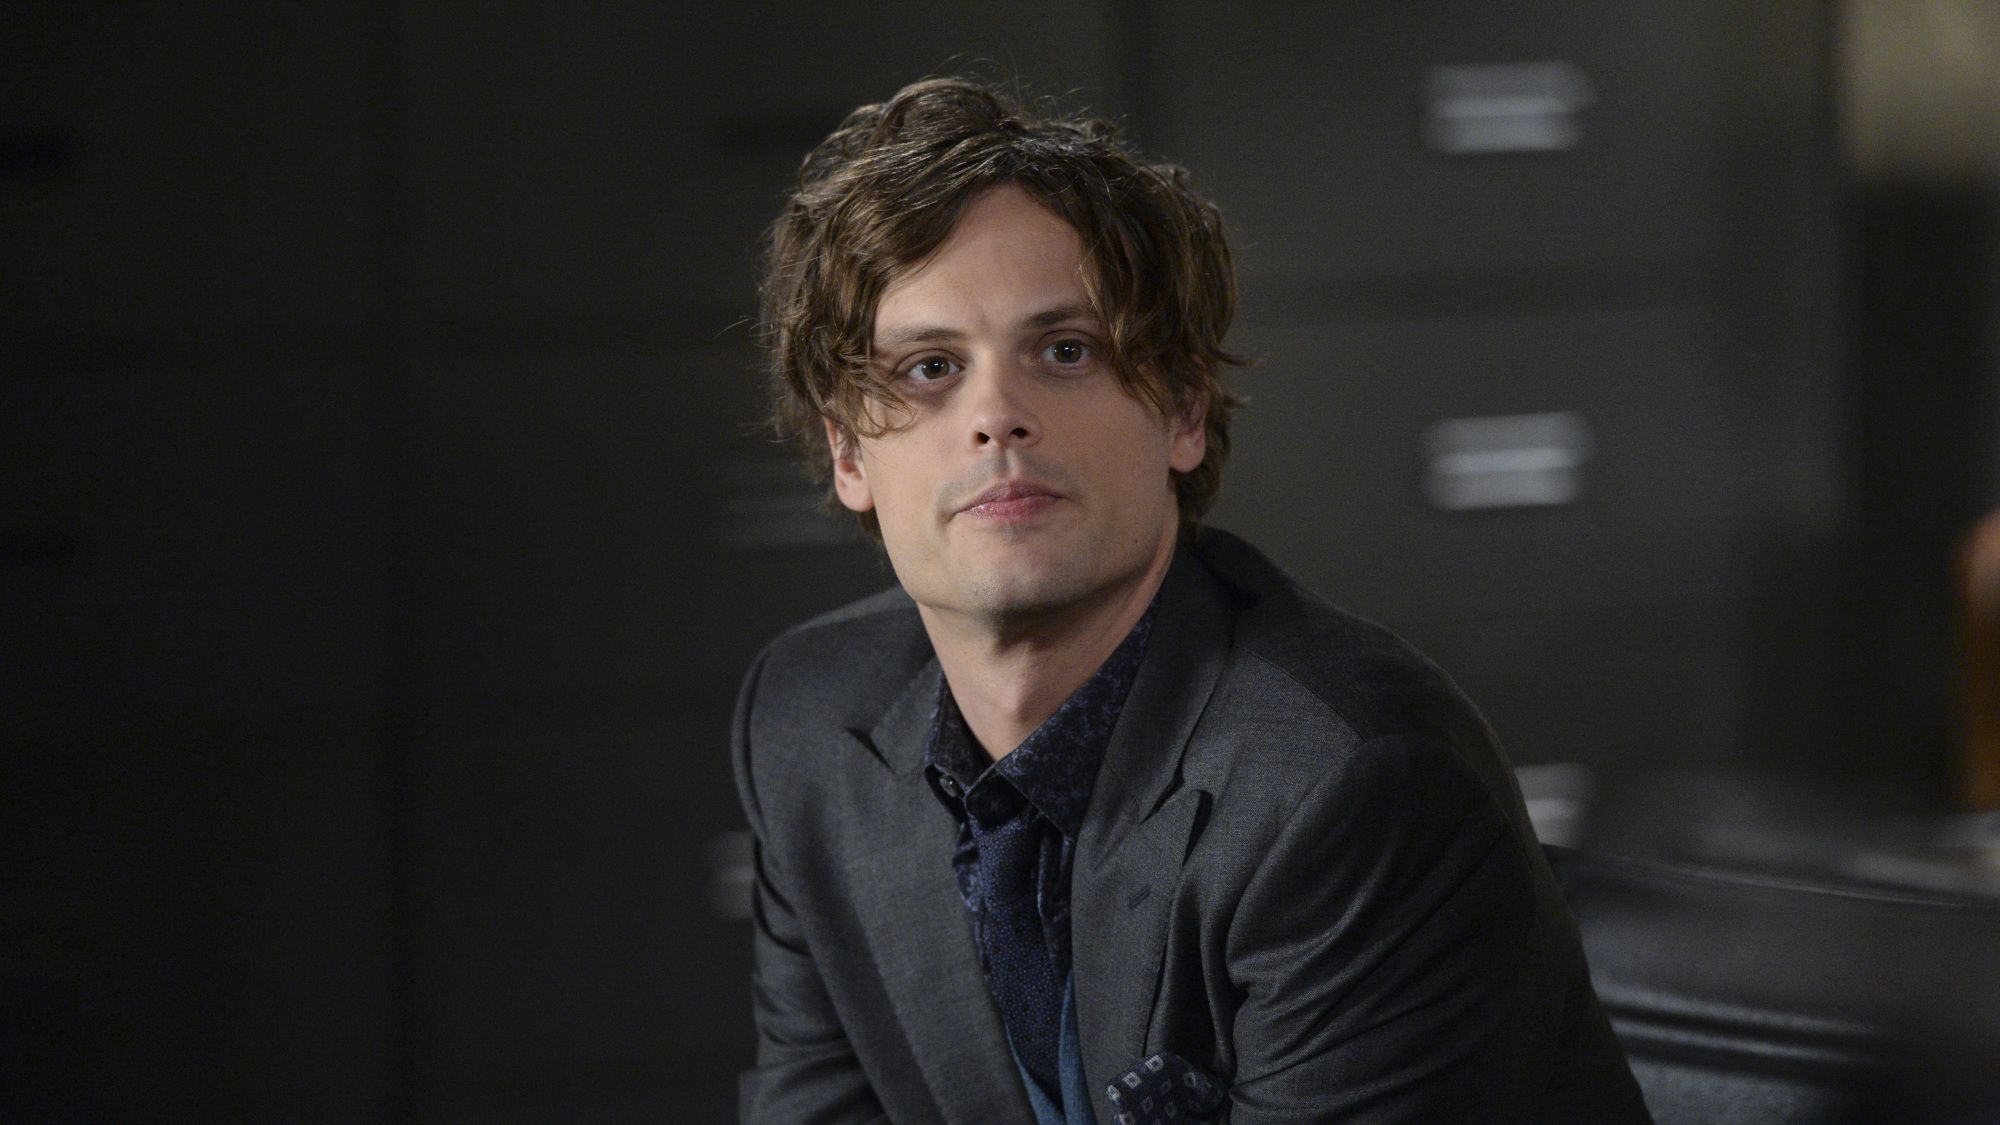 The Most Unforgettable Murders Ever on Criminal Minds